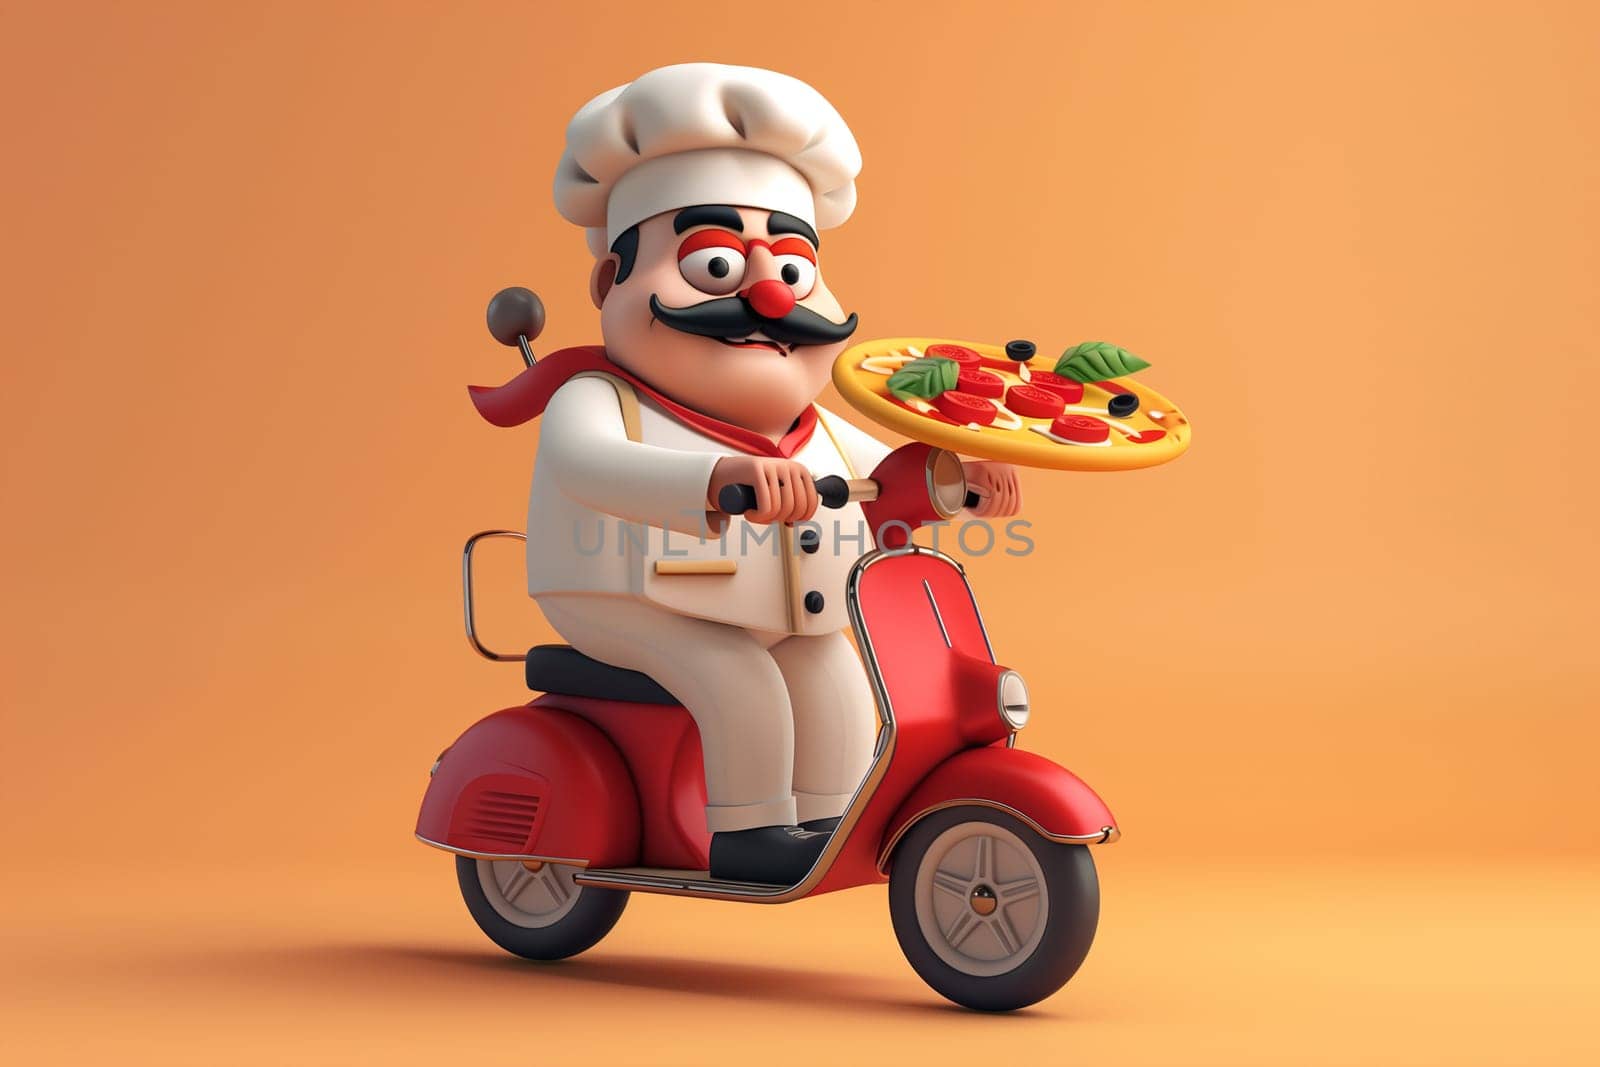 Cartoon Character on Moped Holding Pizza by Sd28DimoN_1976